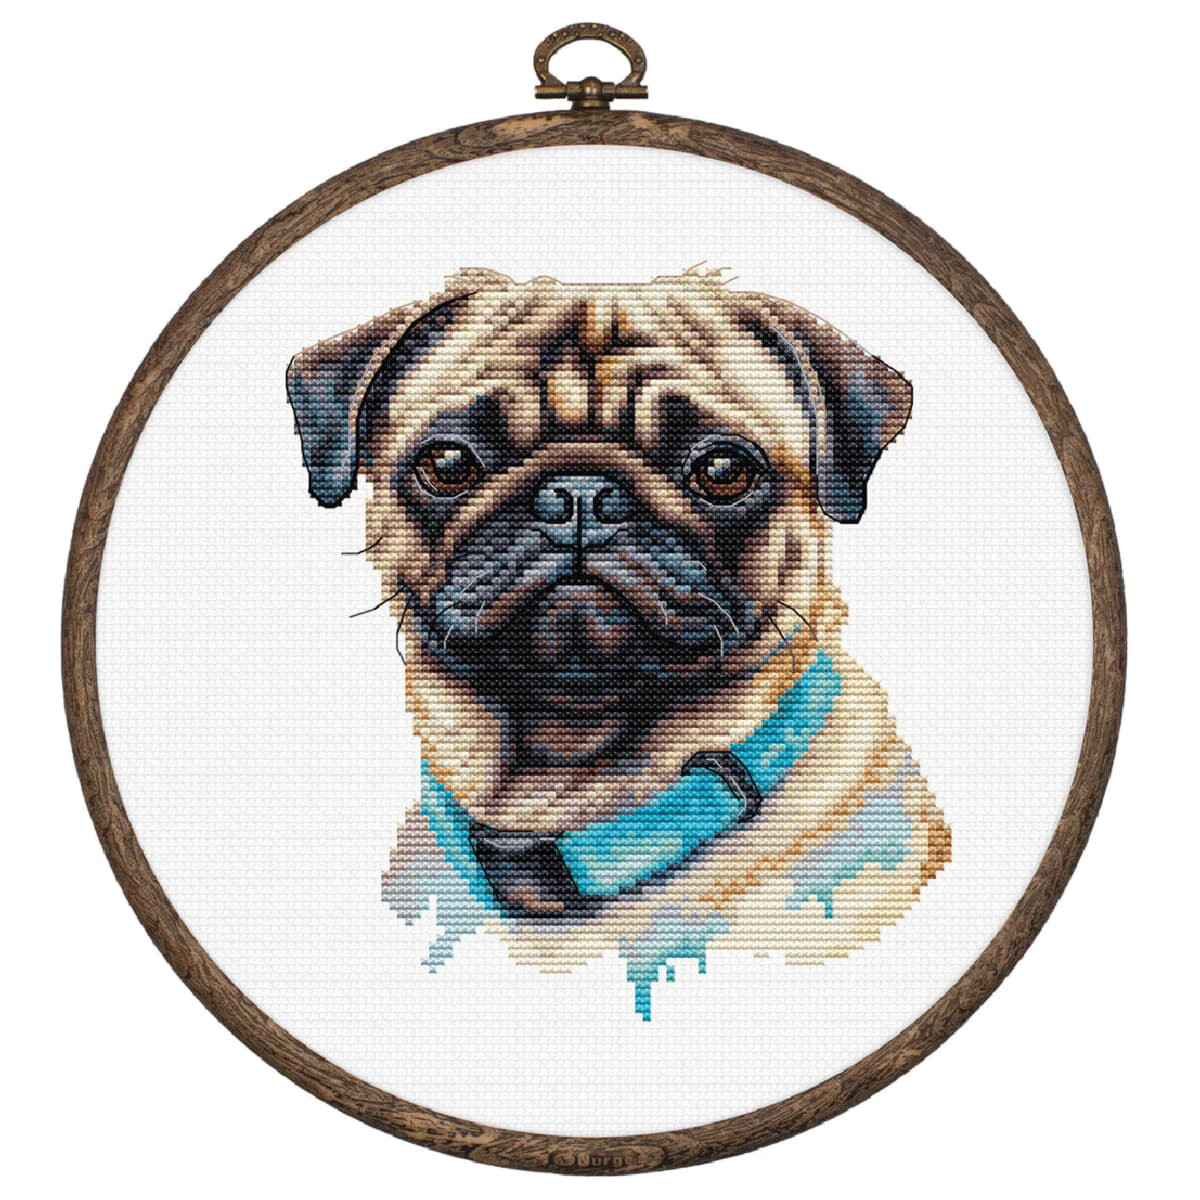 An embroidery pack with a detailed cross-stitch portrait...